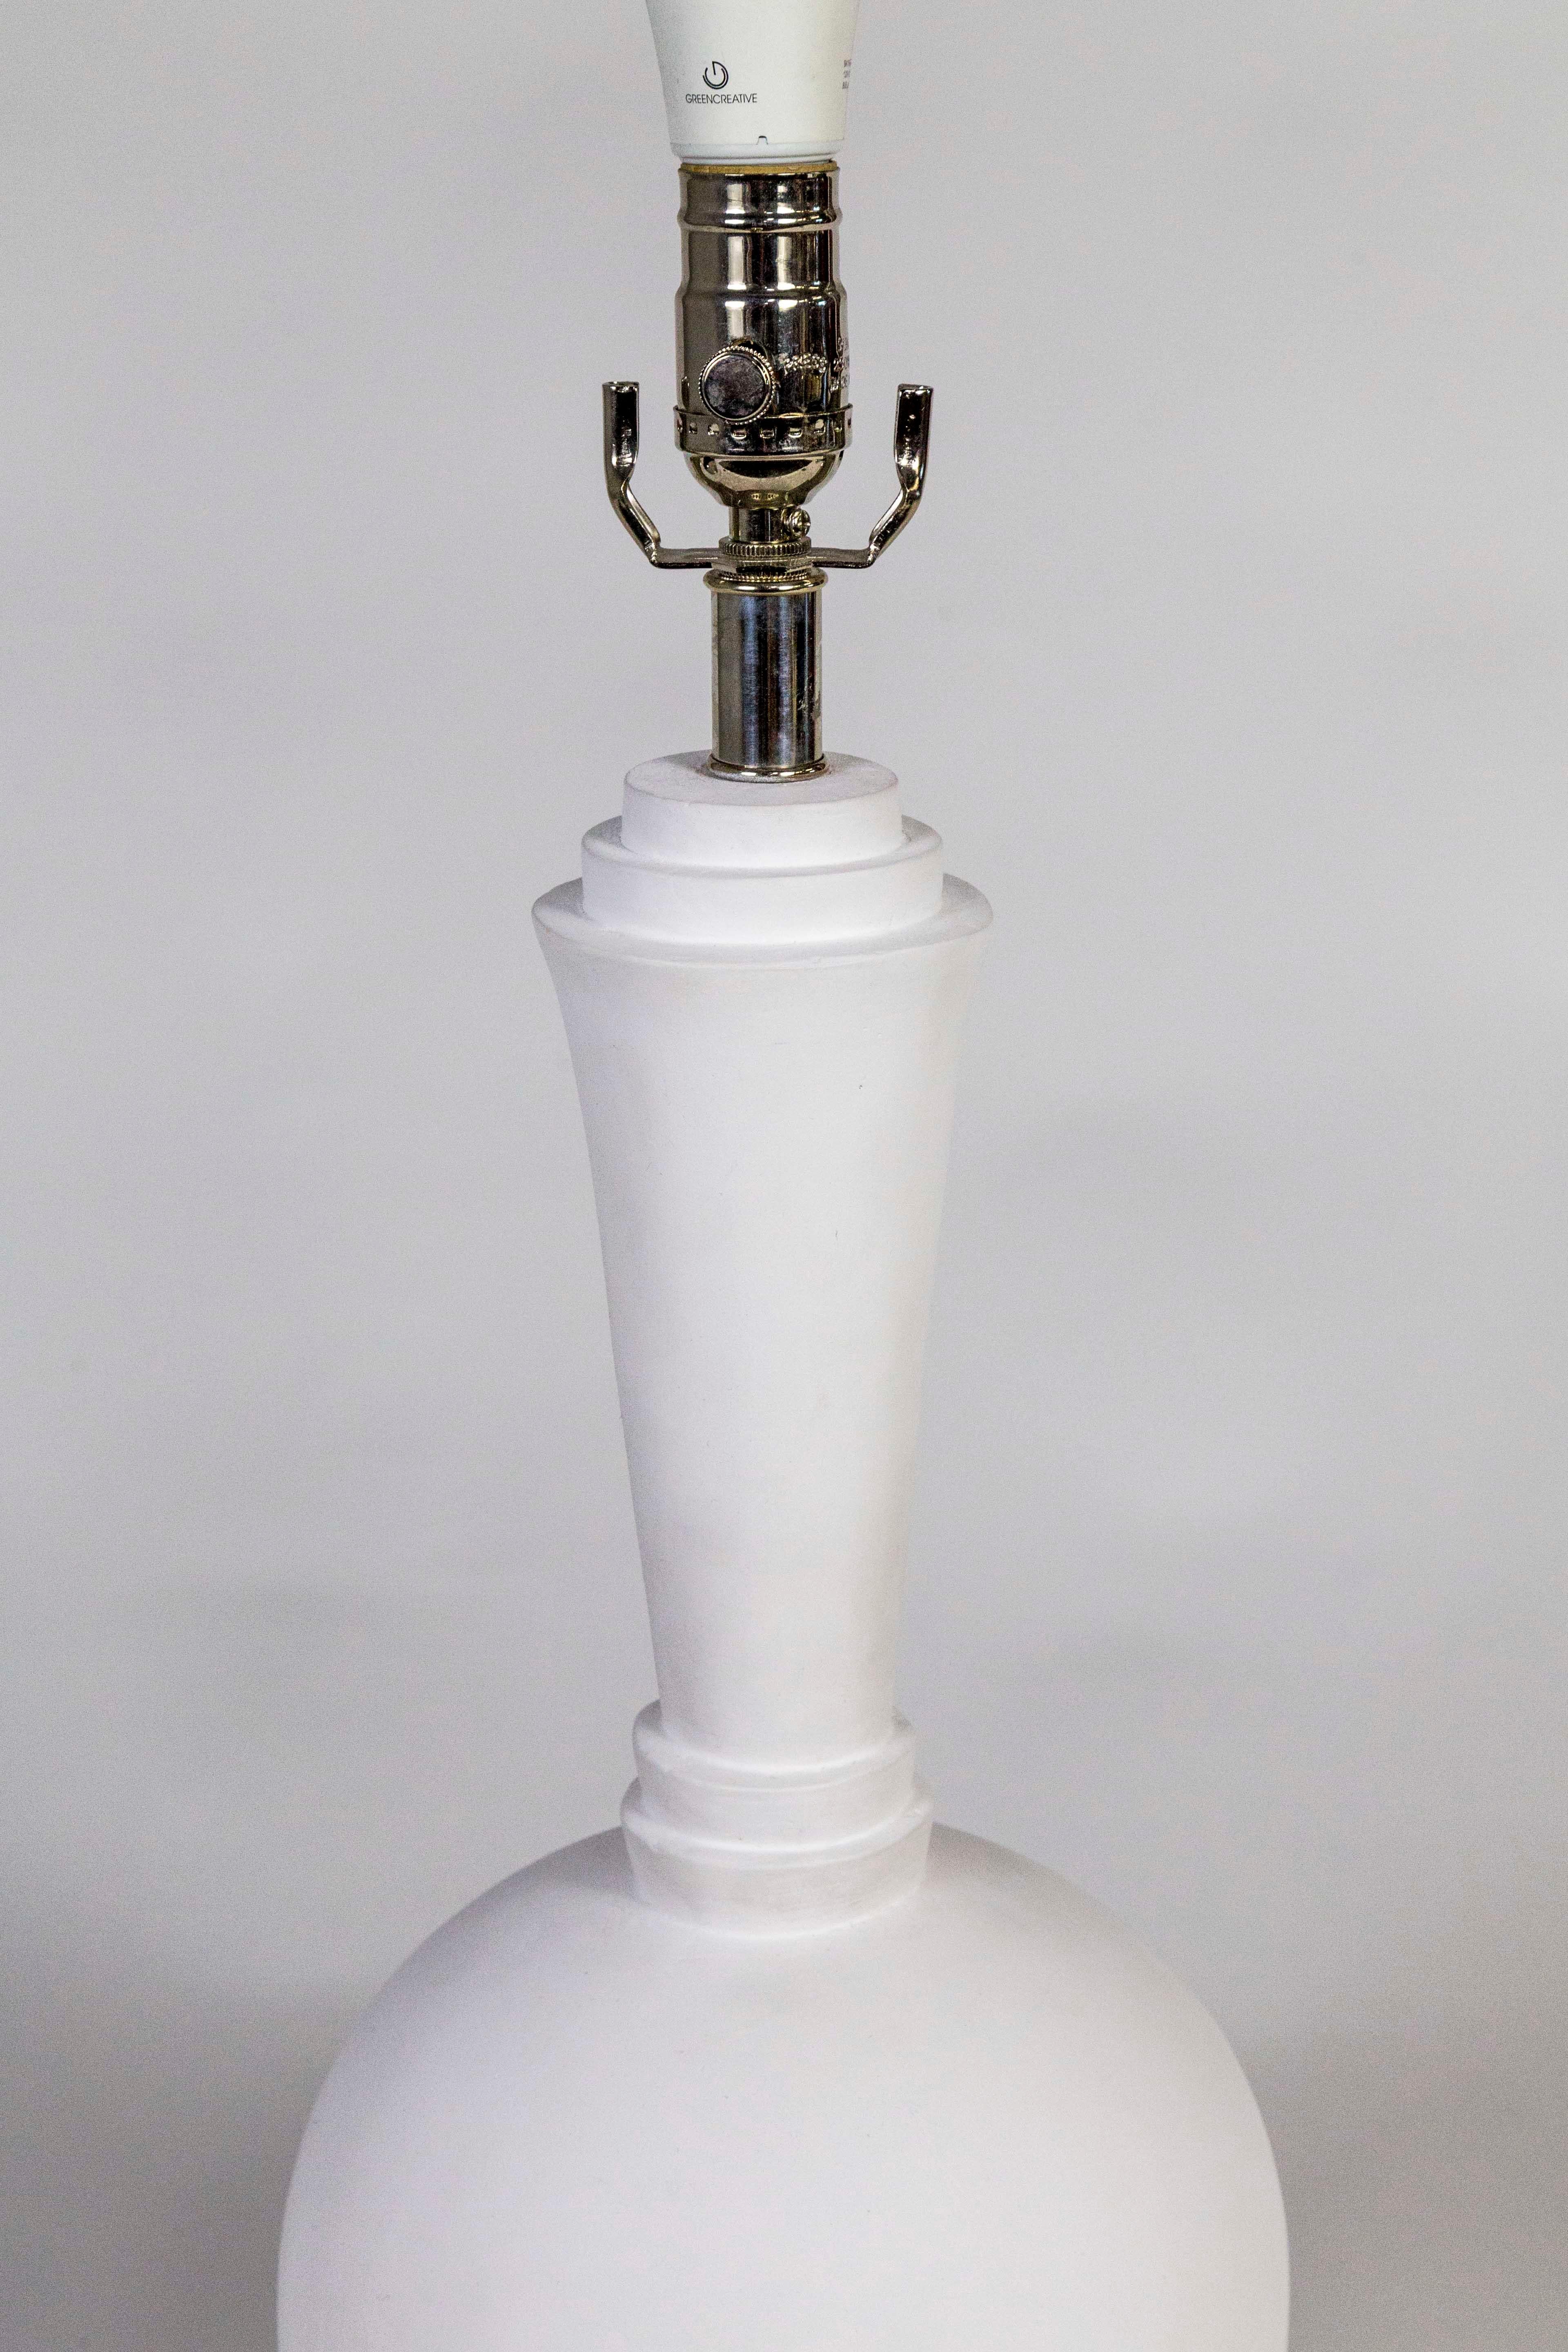 A modernist, molded plaster table lamp in the style of Francis Elkins, fabricated in the 2010s by Ismay and Company San Francisco. With an acrylic base, polished nickel hardware, and 3-way socket; newly wired. Measures: 24” to top of socket 9.5”